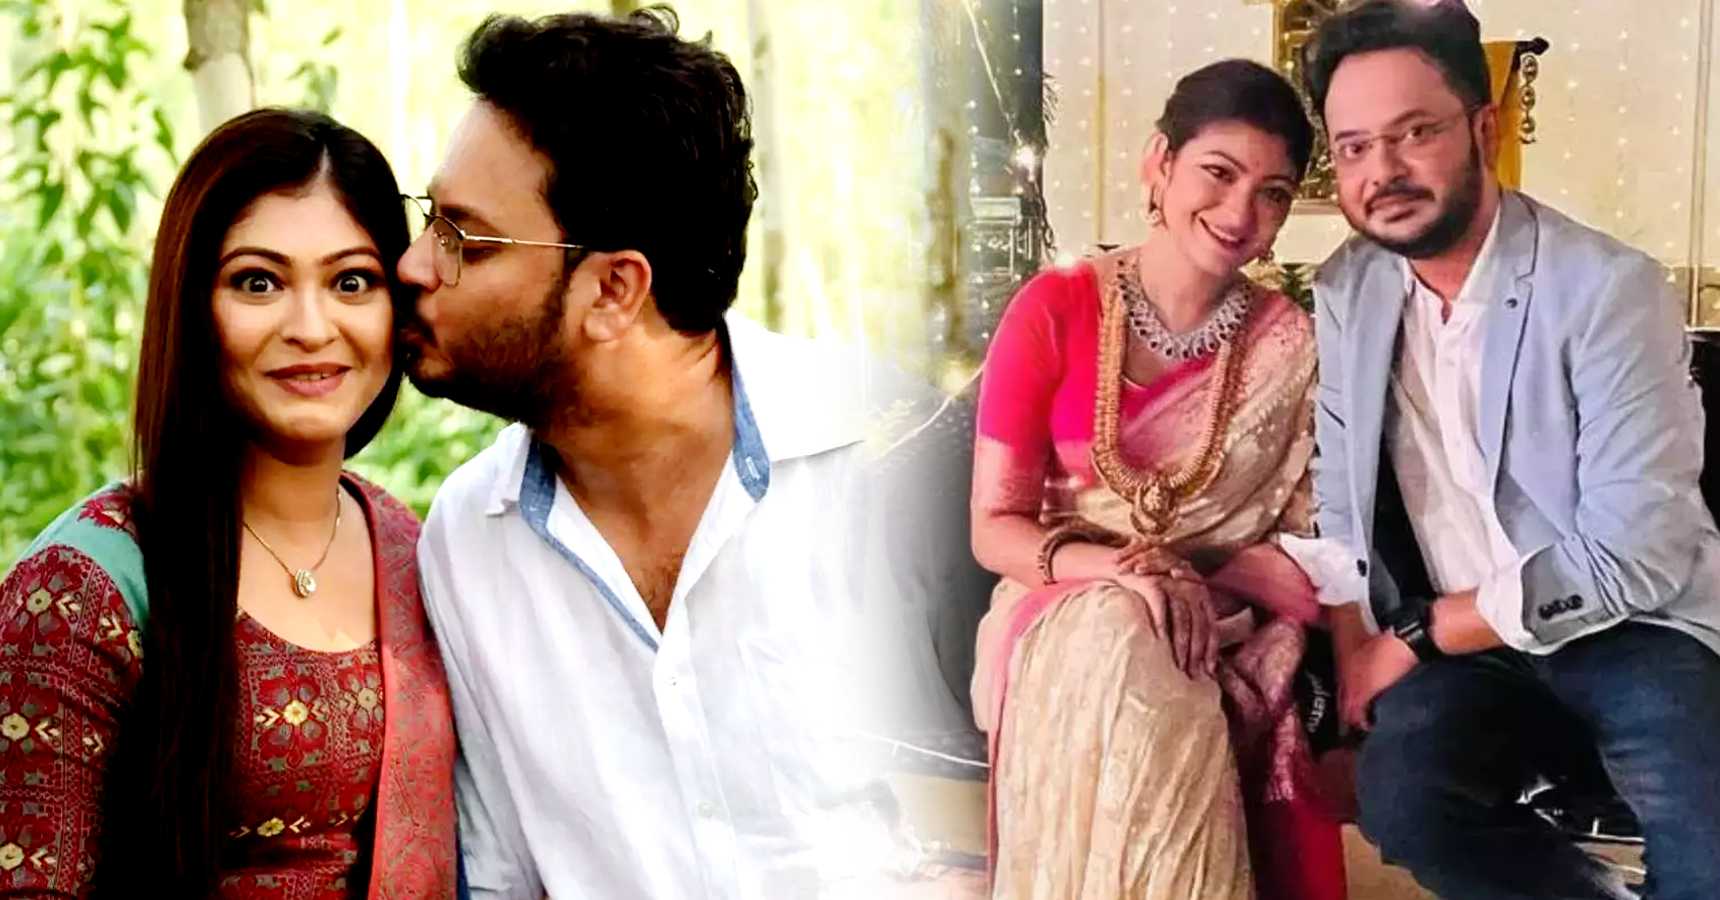 Tollywood actor Rahul Arunoday Banerjee opens up about his relationship with co-actress Rooqma Ray